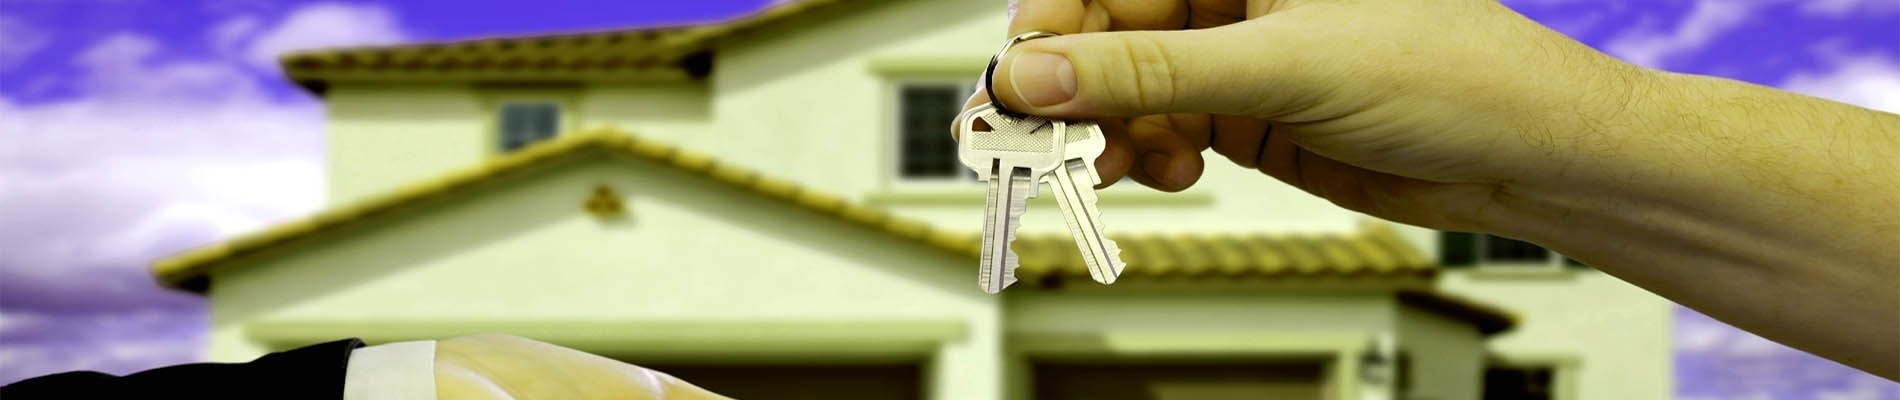 We offer a 15% to all first time house locksmith customers in Winter Park, Florida